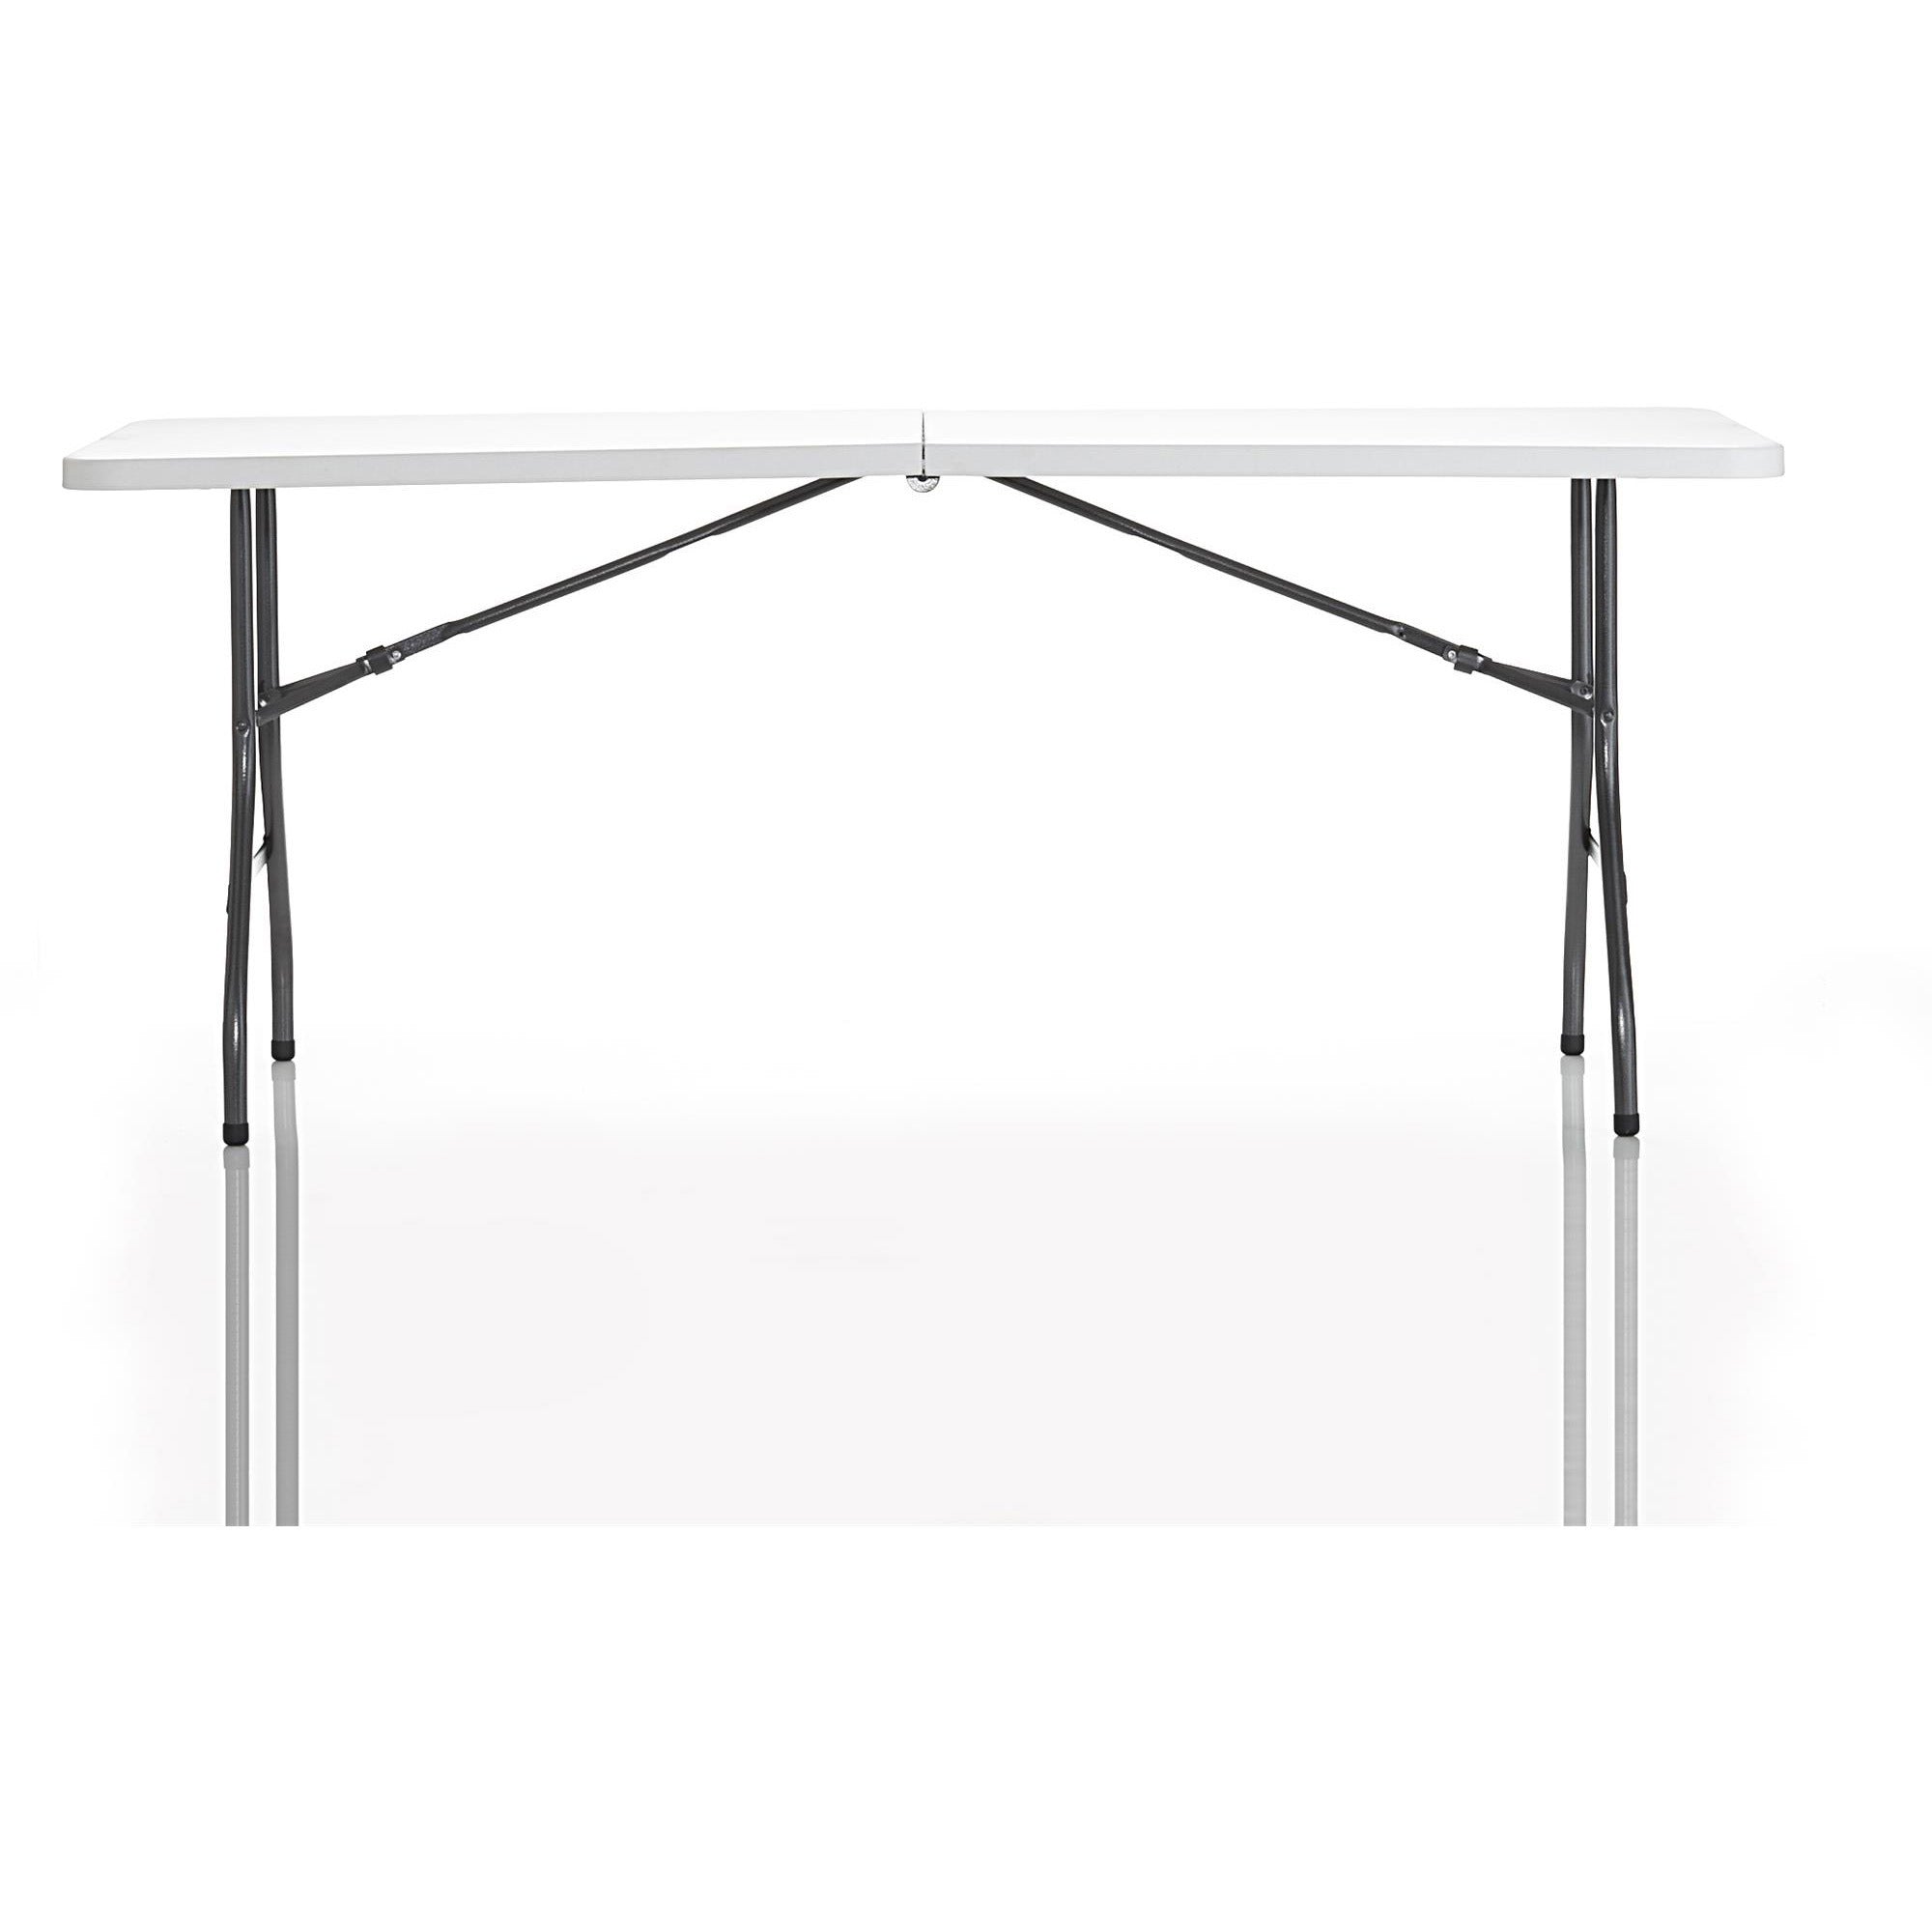 cosco-6-foot-centerfold-blow-molded-folding-table-for-table-toprectangle-top-folding-base-x-2963-table-top-width-x-72-table-top-depth-2925-height-white-1-each_csc14678wsp1 - 5